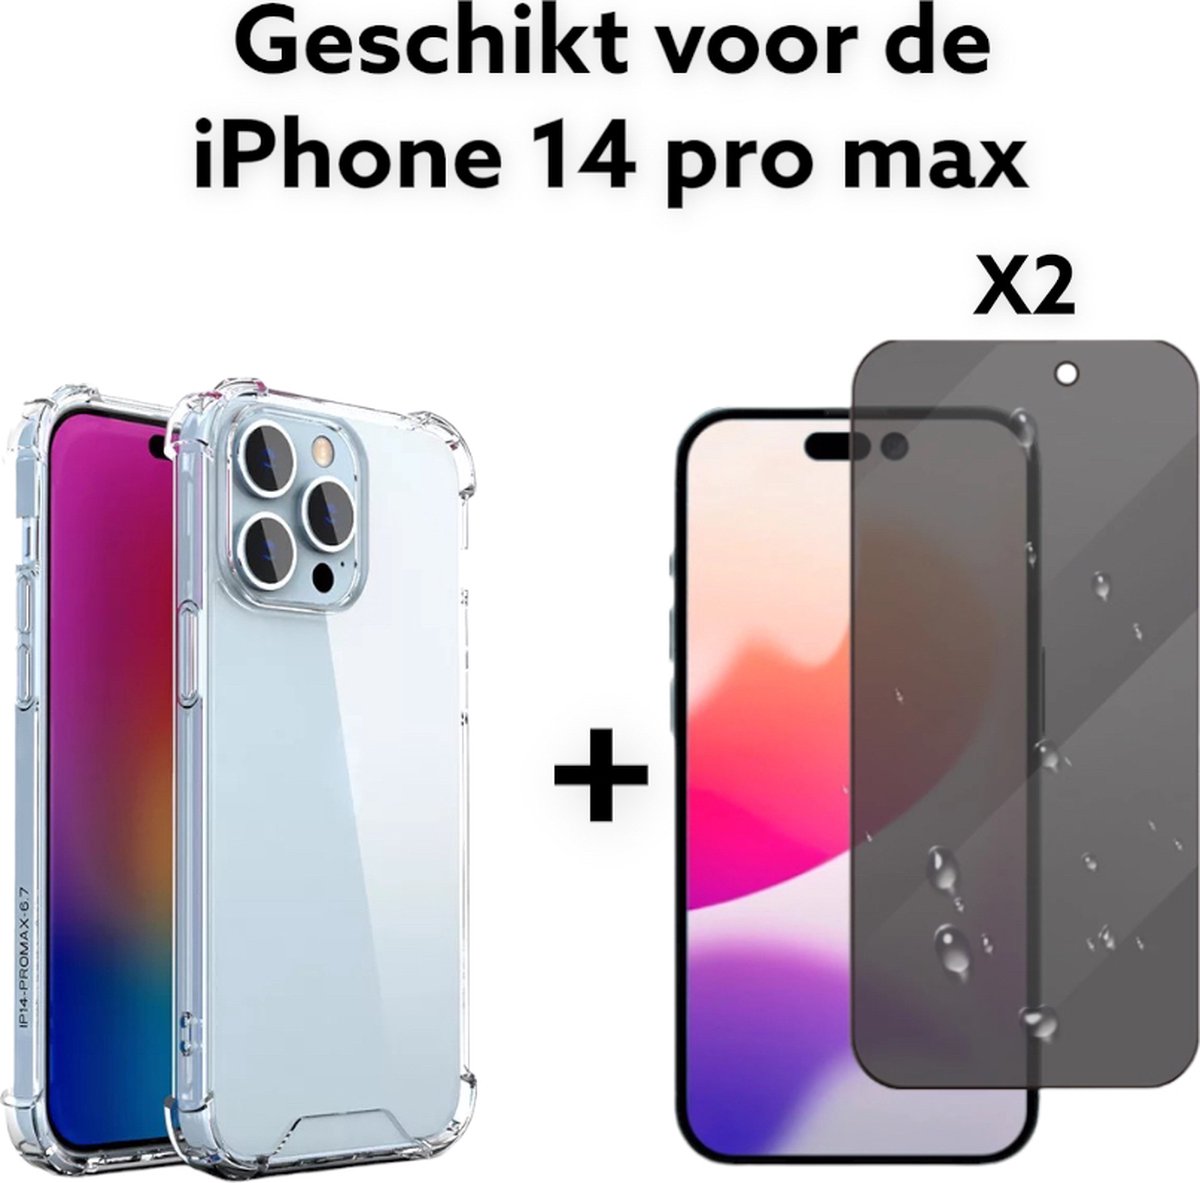 iPhone 14 pro max Hoesje Transparant + 2x privacy screenprotector- iPhone 14 pro max Hoesje Anti Shock - iPhone 14 pro max Anti Shock Case Antishock Shock Proof + 2x privacy tempered glas 3D